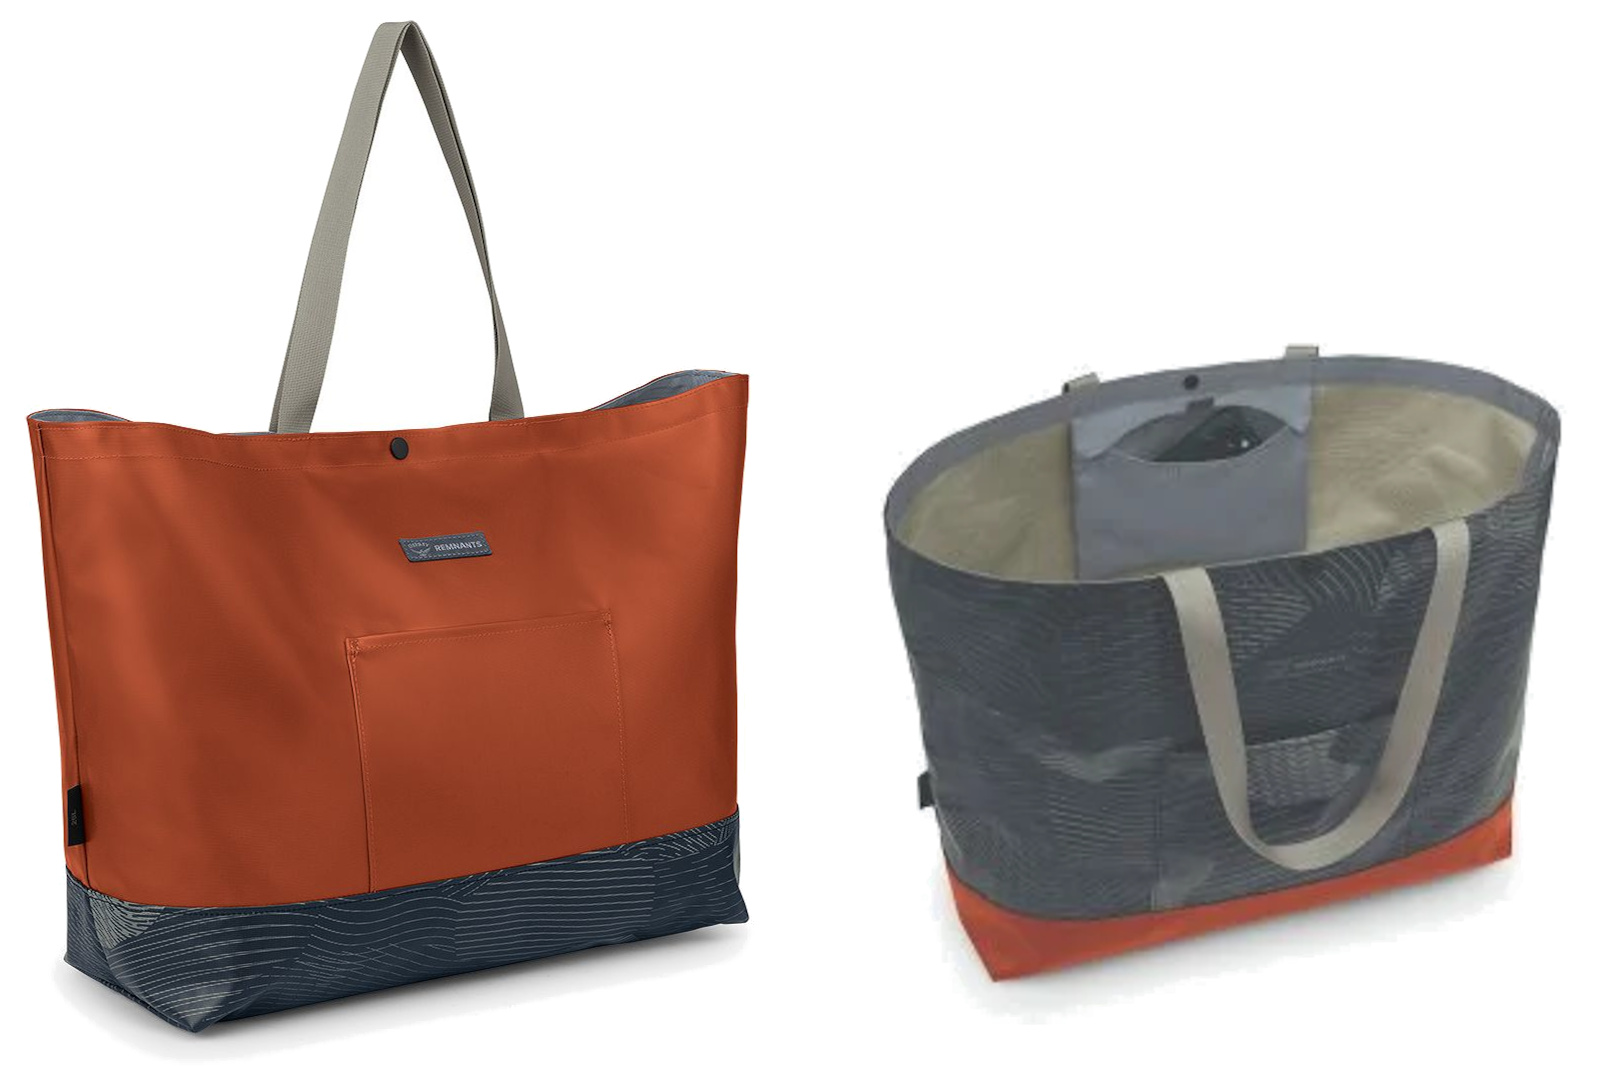 <p>Osprey’s Remnants totes repurpose fabrics from its Transporter supply chain into totes. The end result are weather-resistant and have an external zippered pocket and a smaller secure interior pocket. In all, it’s a resource-conscious approach to a simple design.</p> <a class="buy-now single" href="https://osprey.pxf.io/c/381569/1765694/20745?subId1=gjsposprey4thq224&u=https%3A%2F%2Fwww.osprey.com%2Fosprey-remnants-weather-resistant-tote-l-1%3Fcolor%3DCamo%252520Lines%252520Print">Shop Now</a>